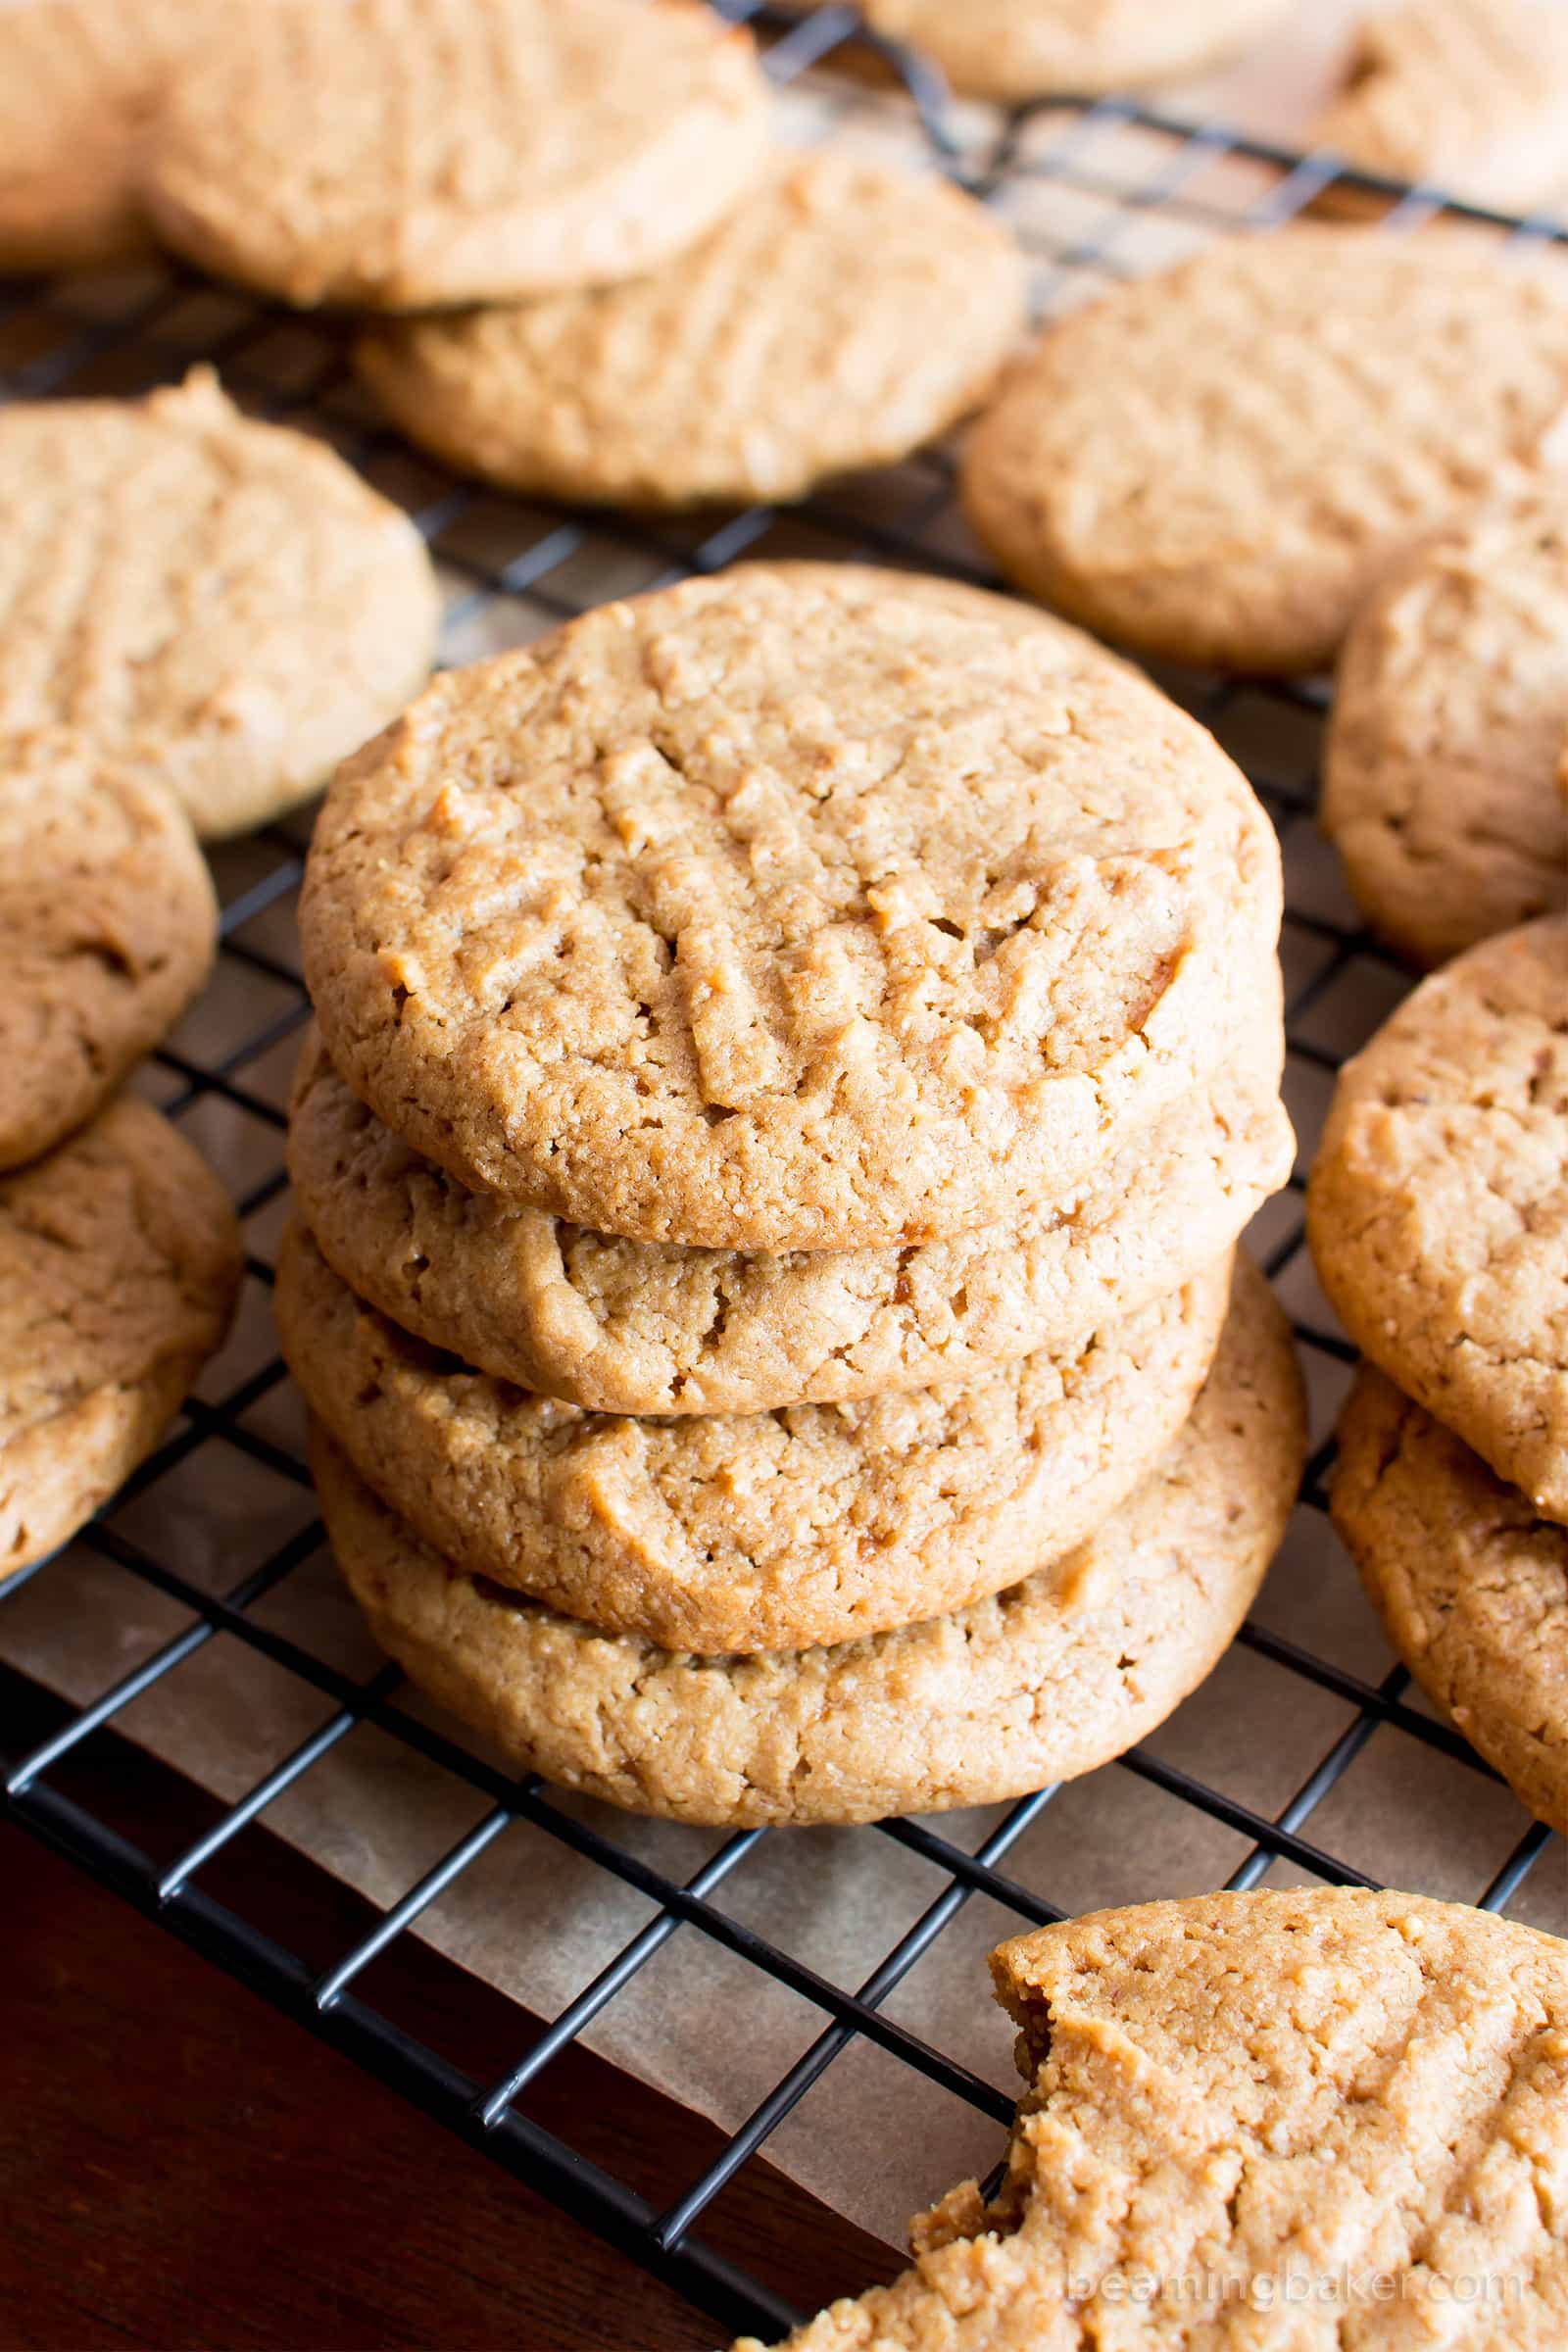 Easy Vegan Peanut Butter Cookies (V, GF): an easy recipe for comforting peanut butter cookies that are lightly crispy on the outside, soft and chewy on the inside, made with healthy, whole ingredients! #Vegan #GlutenFree #DairyFree #Healthy #Dessert #ProteinRich | Recipe on BeamingBaker.com